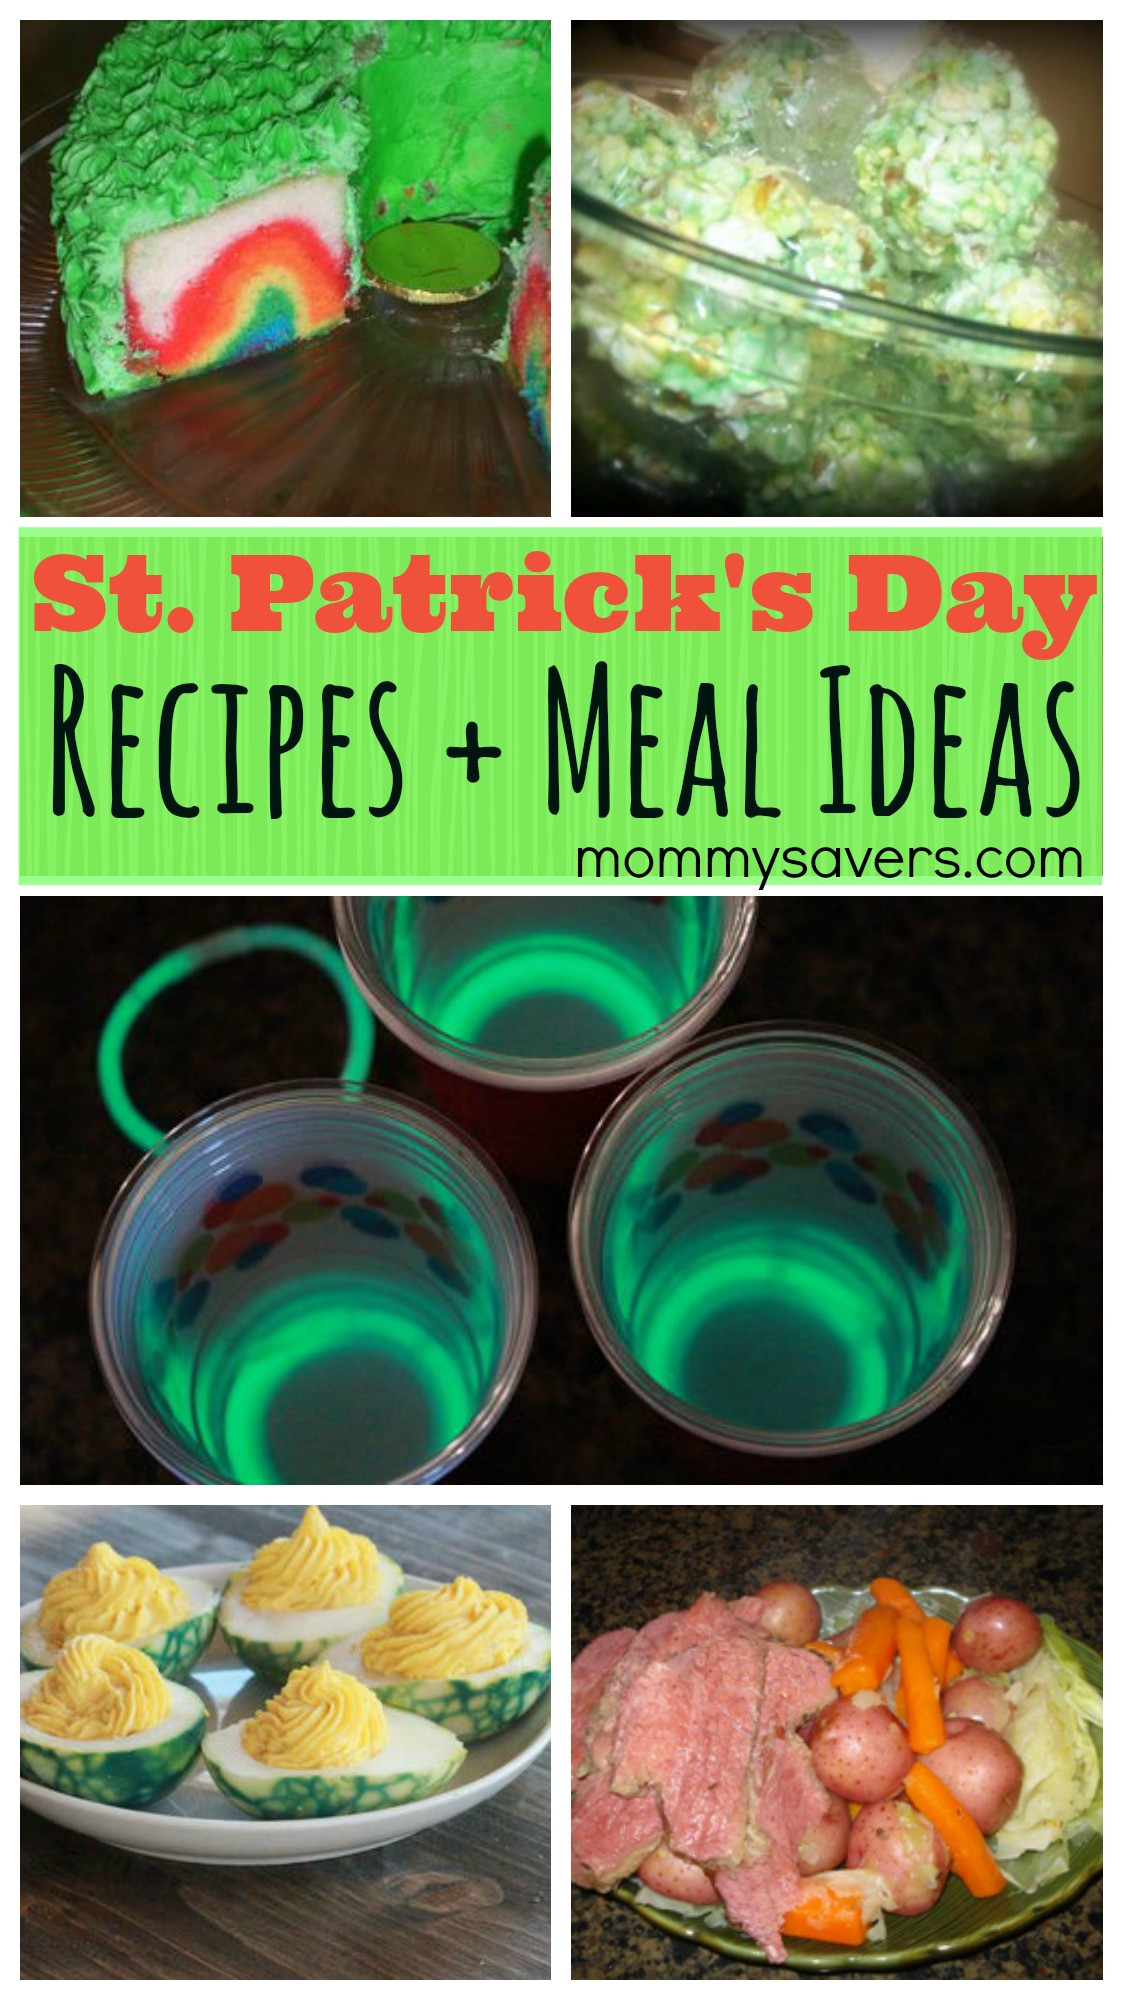 St Patrick's Day Meal Ideas
 St Patrick s Day Recipes and Meal Ideas